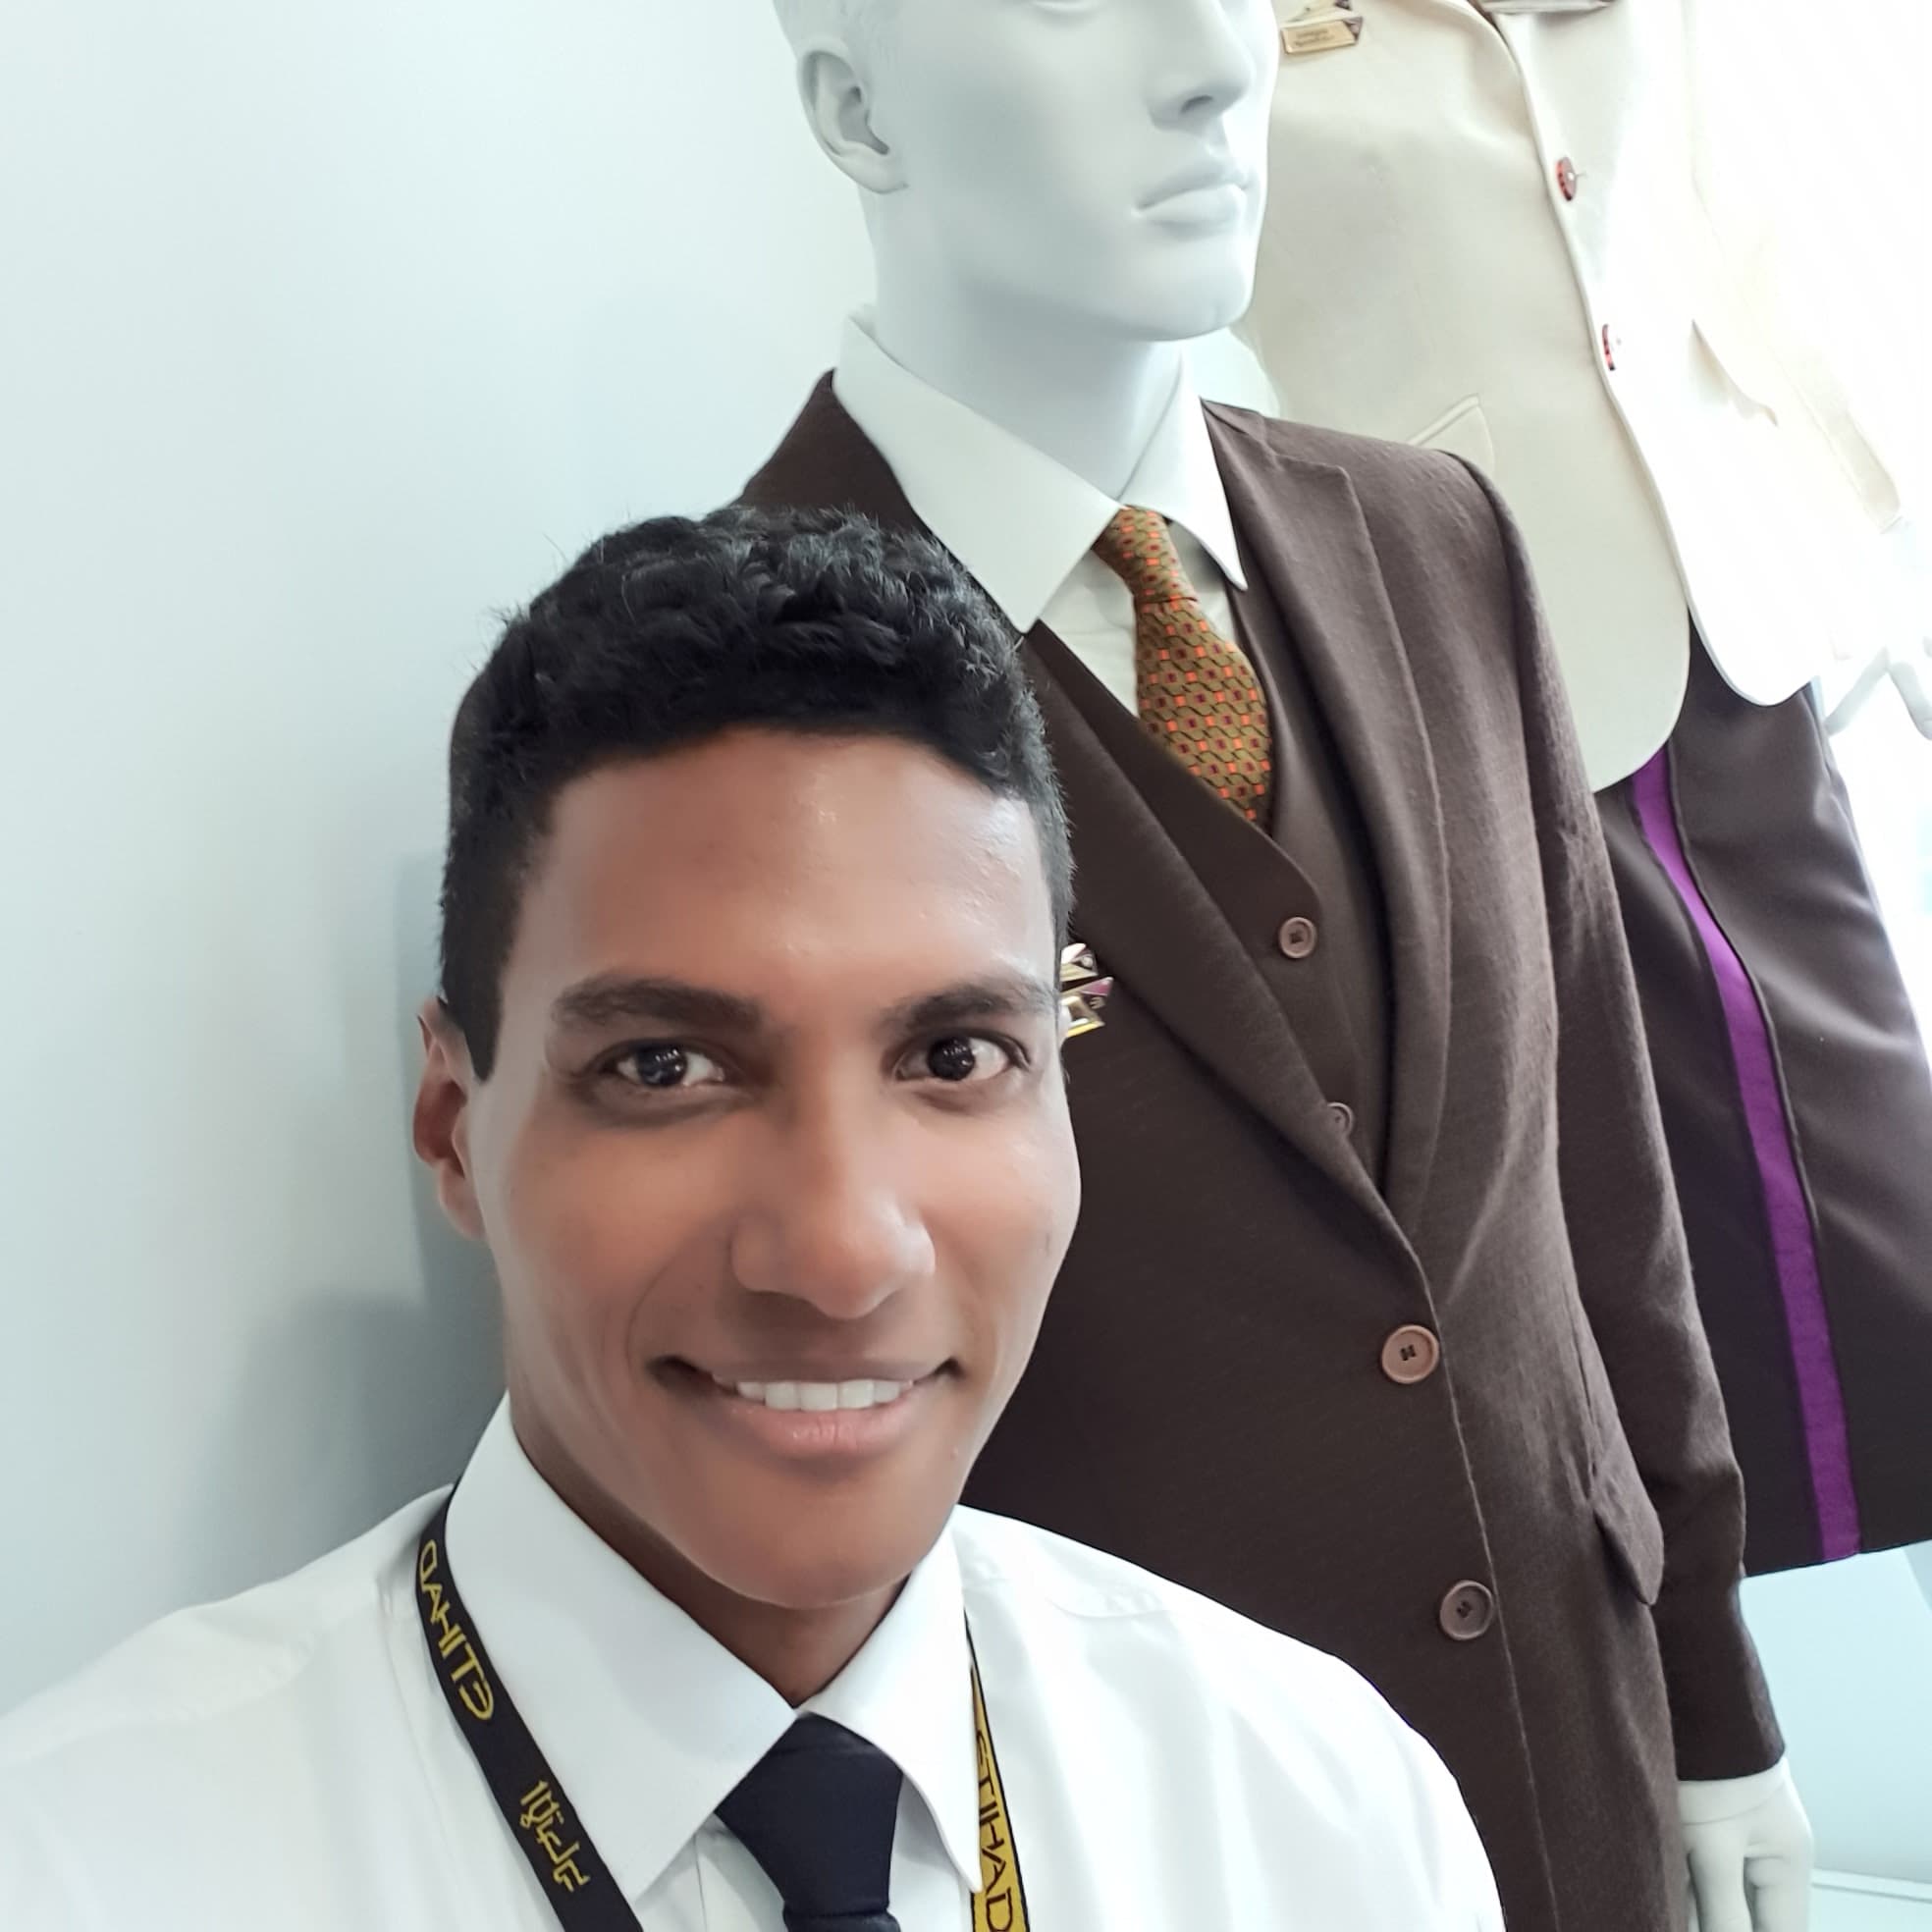 A Fly Guys Cabin Crew Lounge  Some great updates for the Air India  gallery coming from Vijay  Follow Fly Guy   instagramcominternationalflyguy airline airindia indianairline   Facebook